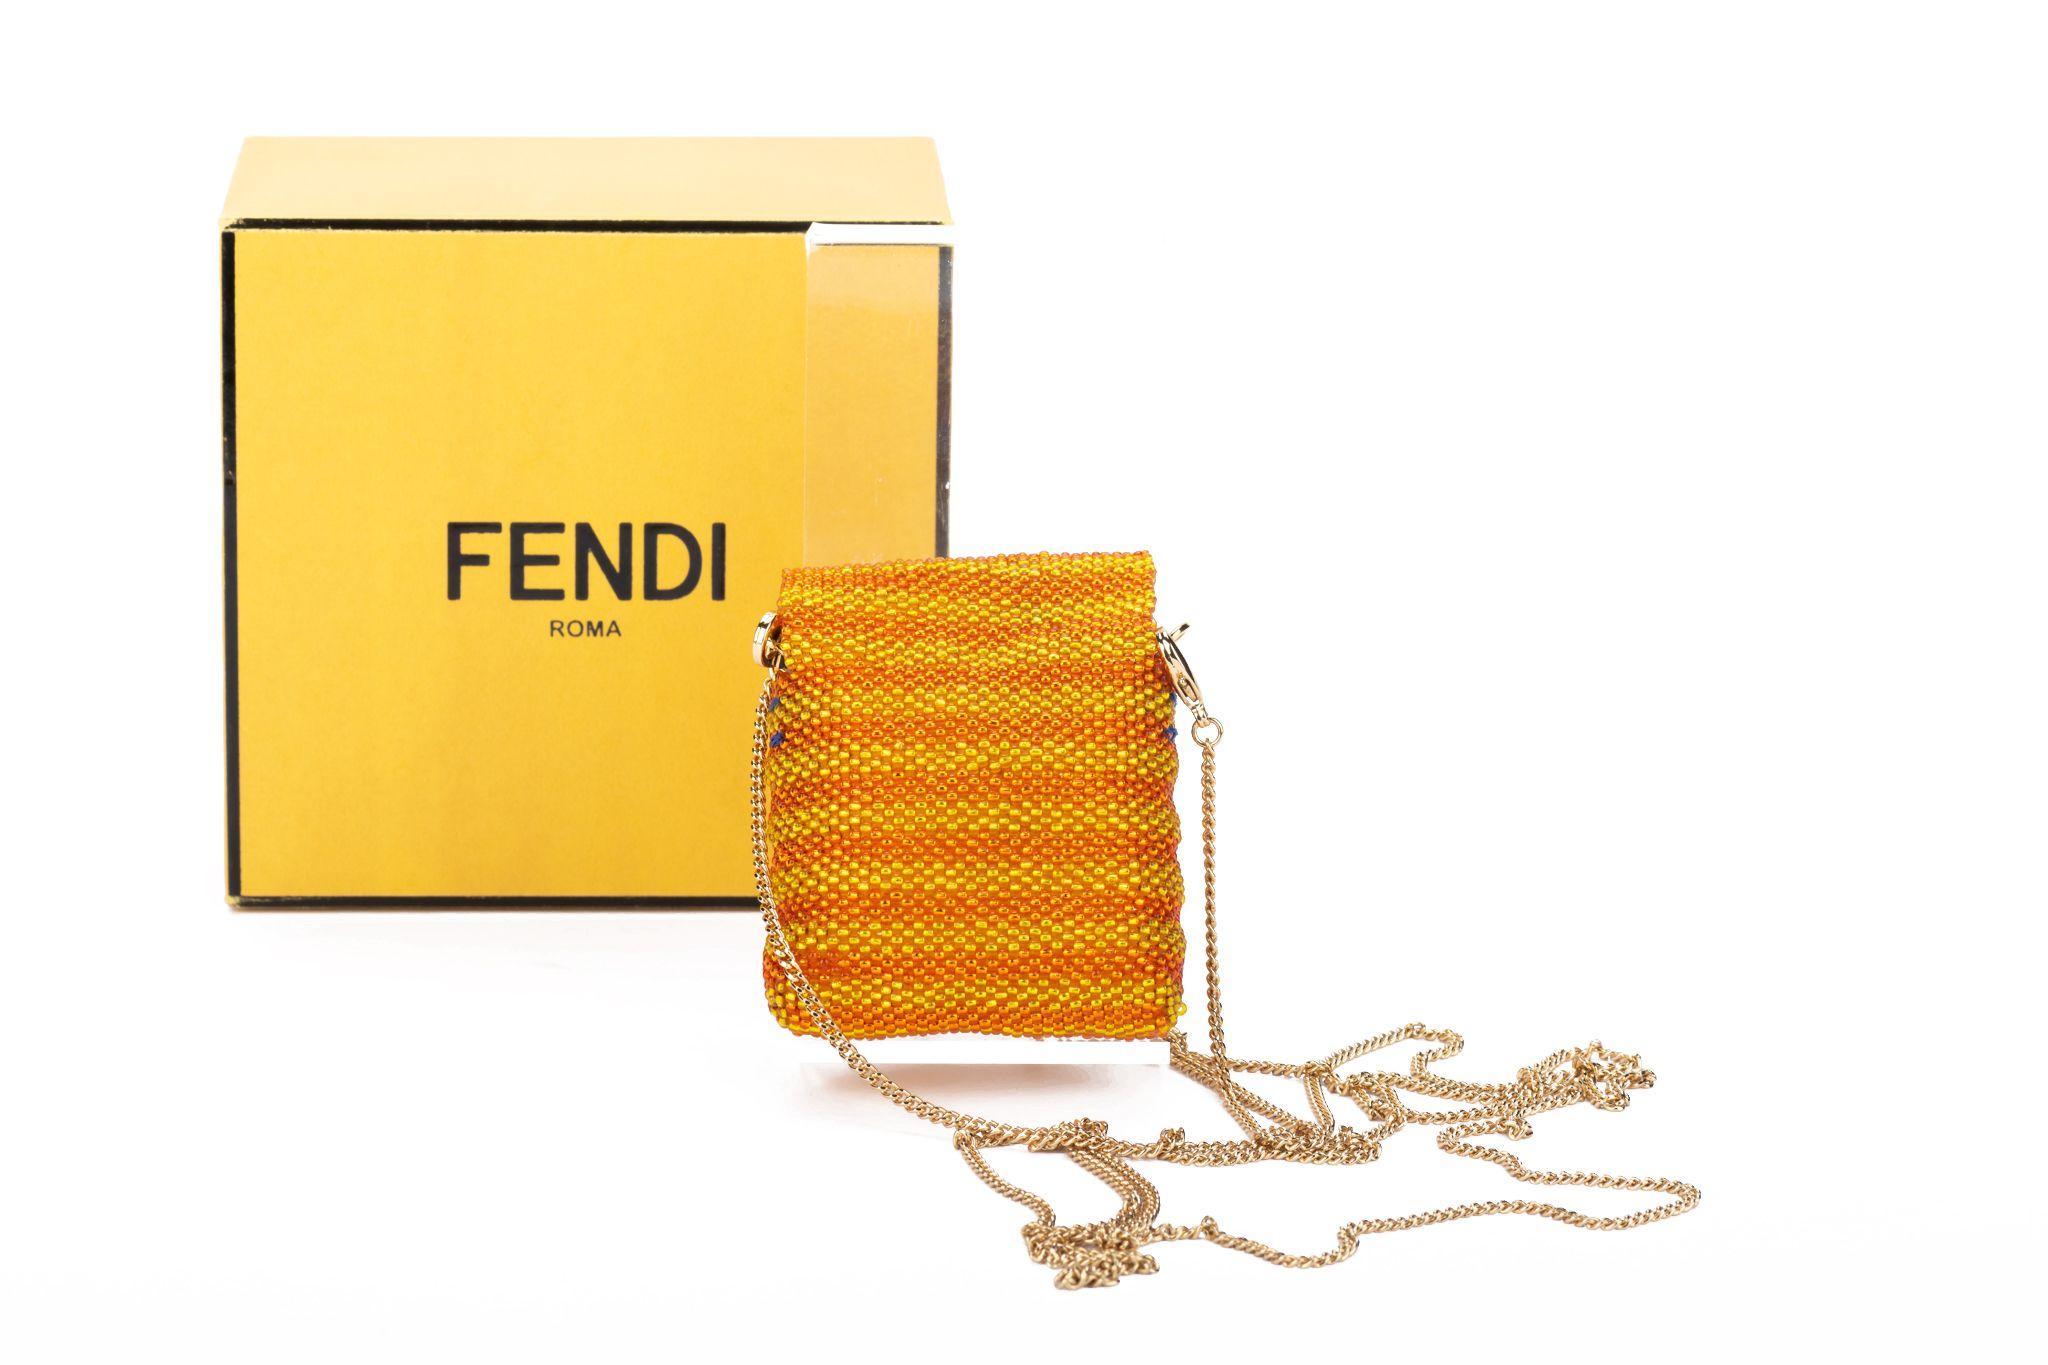 Fendi NIB pico baguette in orange and yellow glass beads with a purple five-petal flower and a 23,5 inch detachable shoulder strap. Comes with box and original dust cover.
